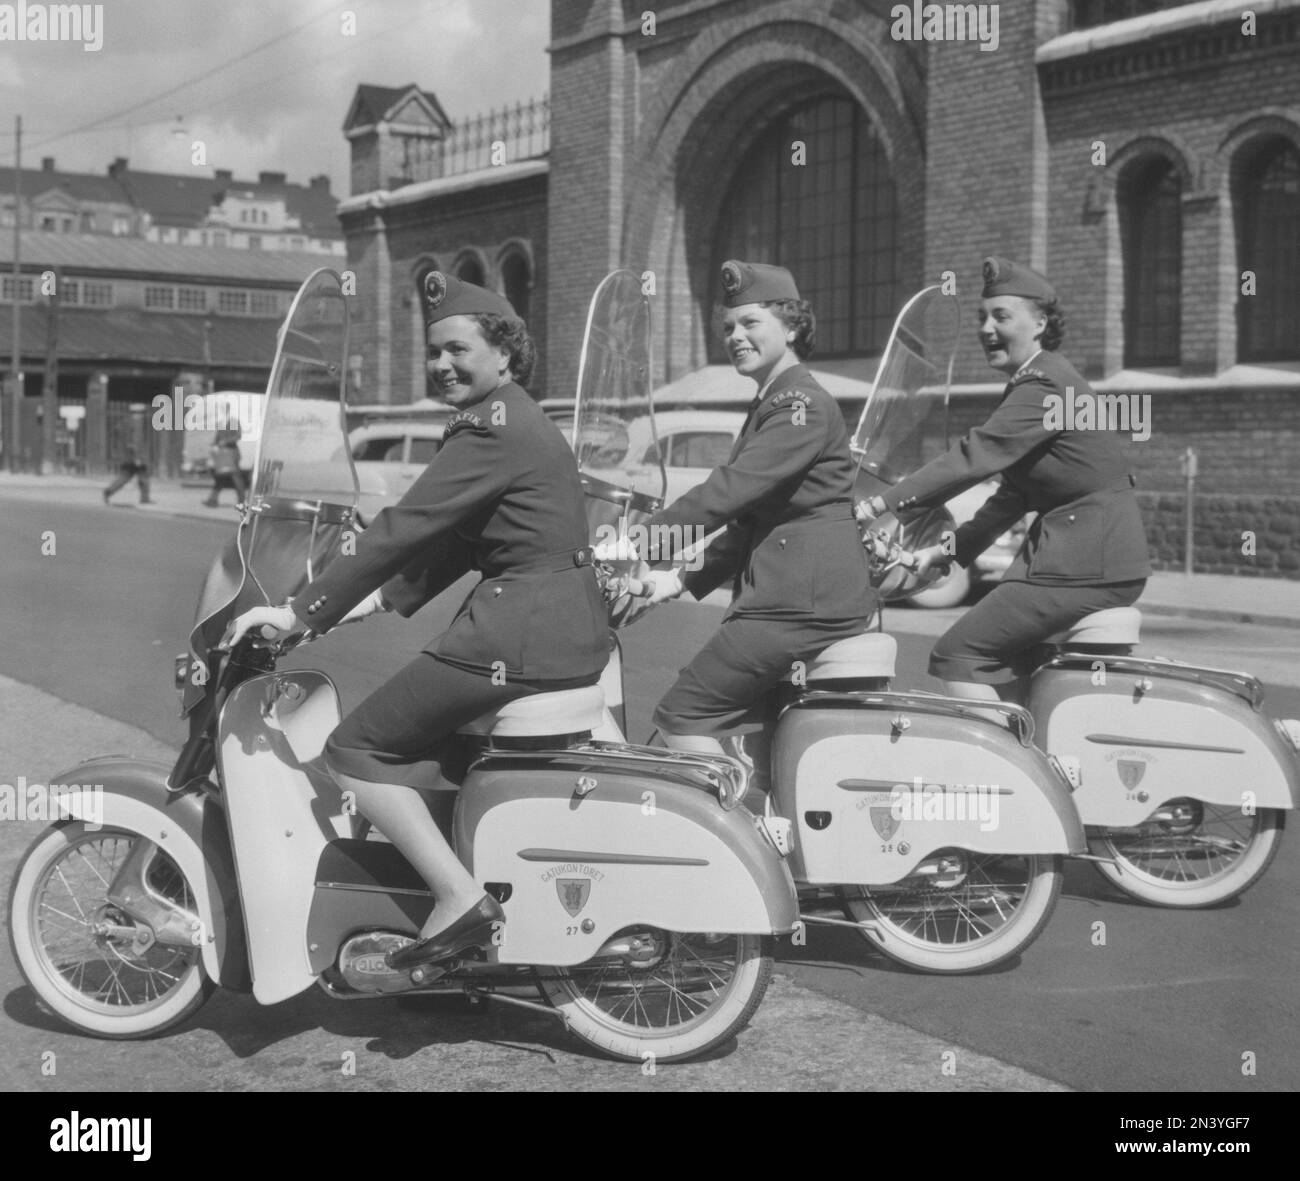 In the 1950s. The traffic wardens in Stockholm on their brand new scooters, labeled with the emblem of the city on the side. Gunvor Hedblad, Inga Gustavsson and Siv Blomberg. Sweden 1959 Stock Photo